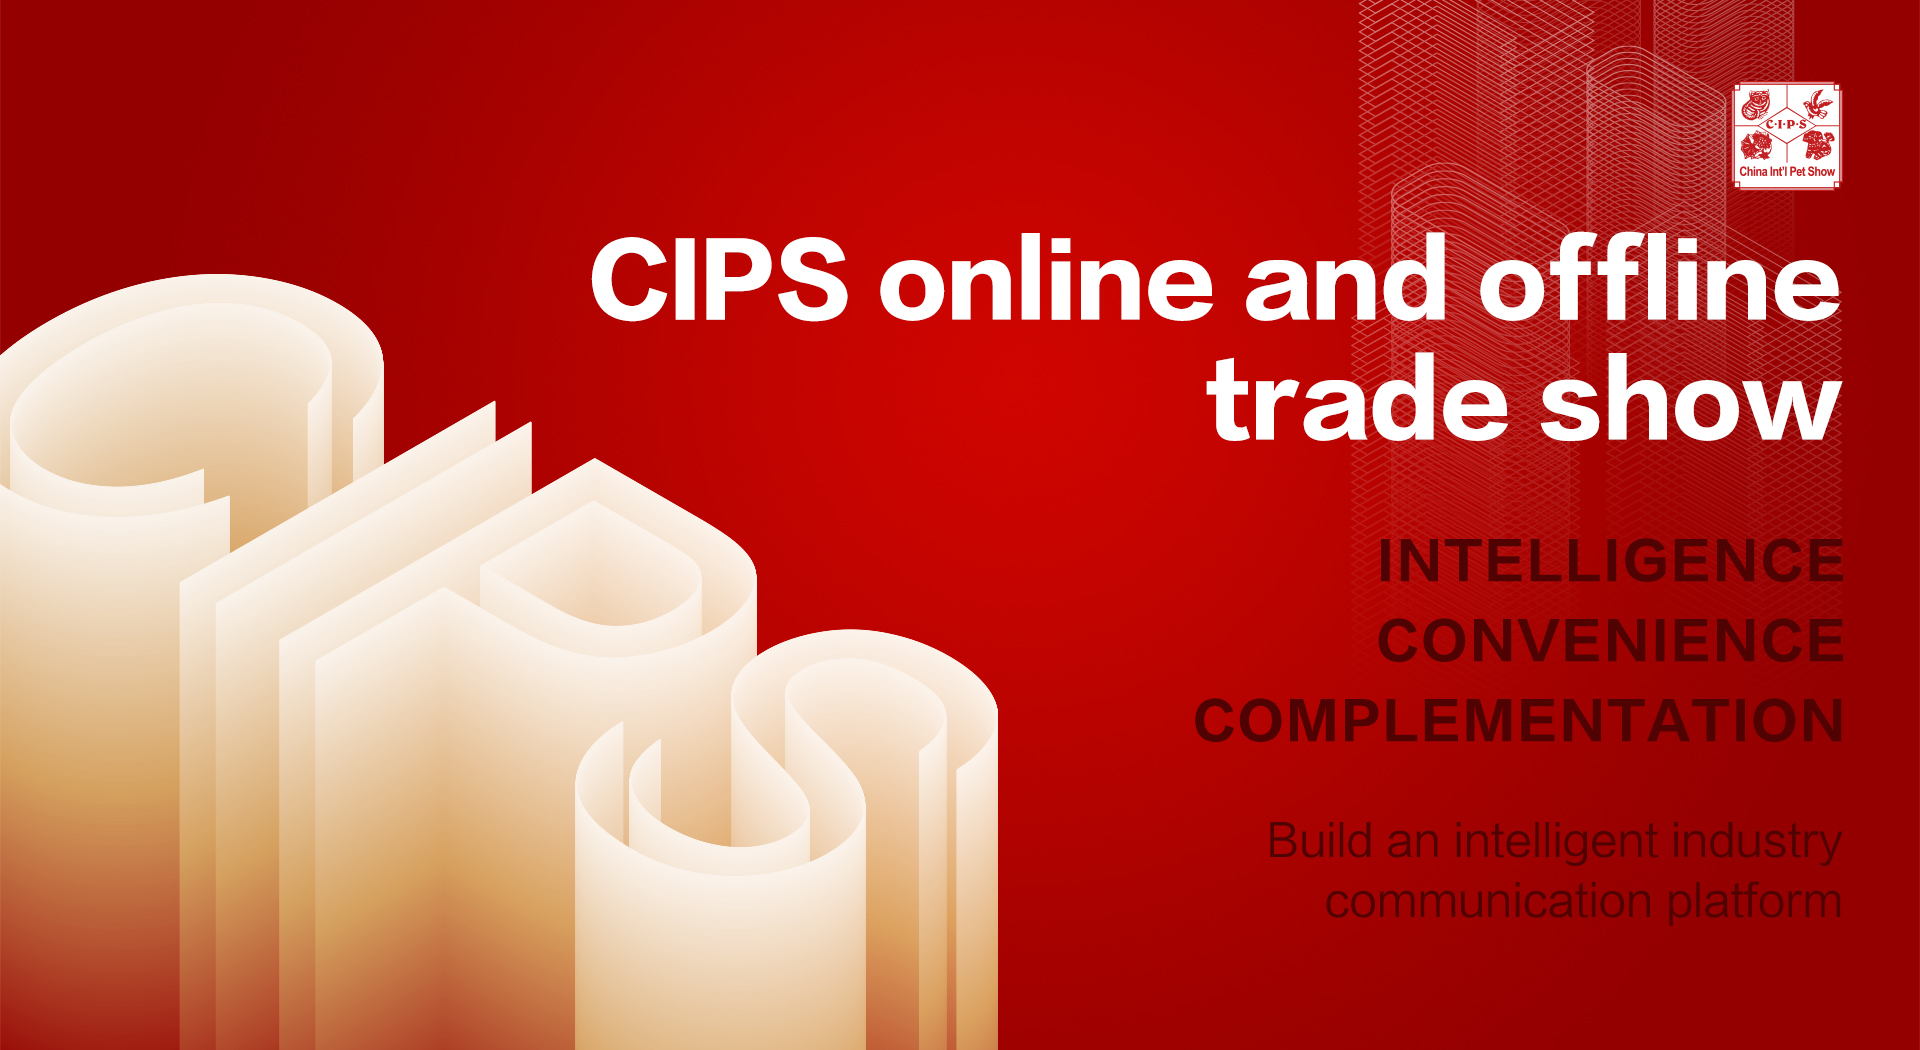 CIPS Continues Its Online & Offline Channel in 2022